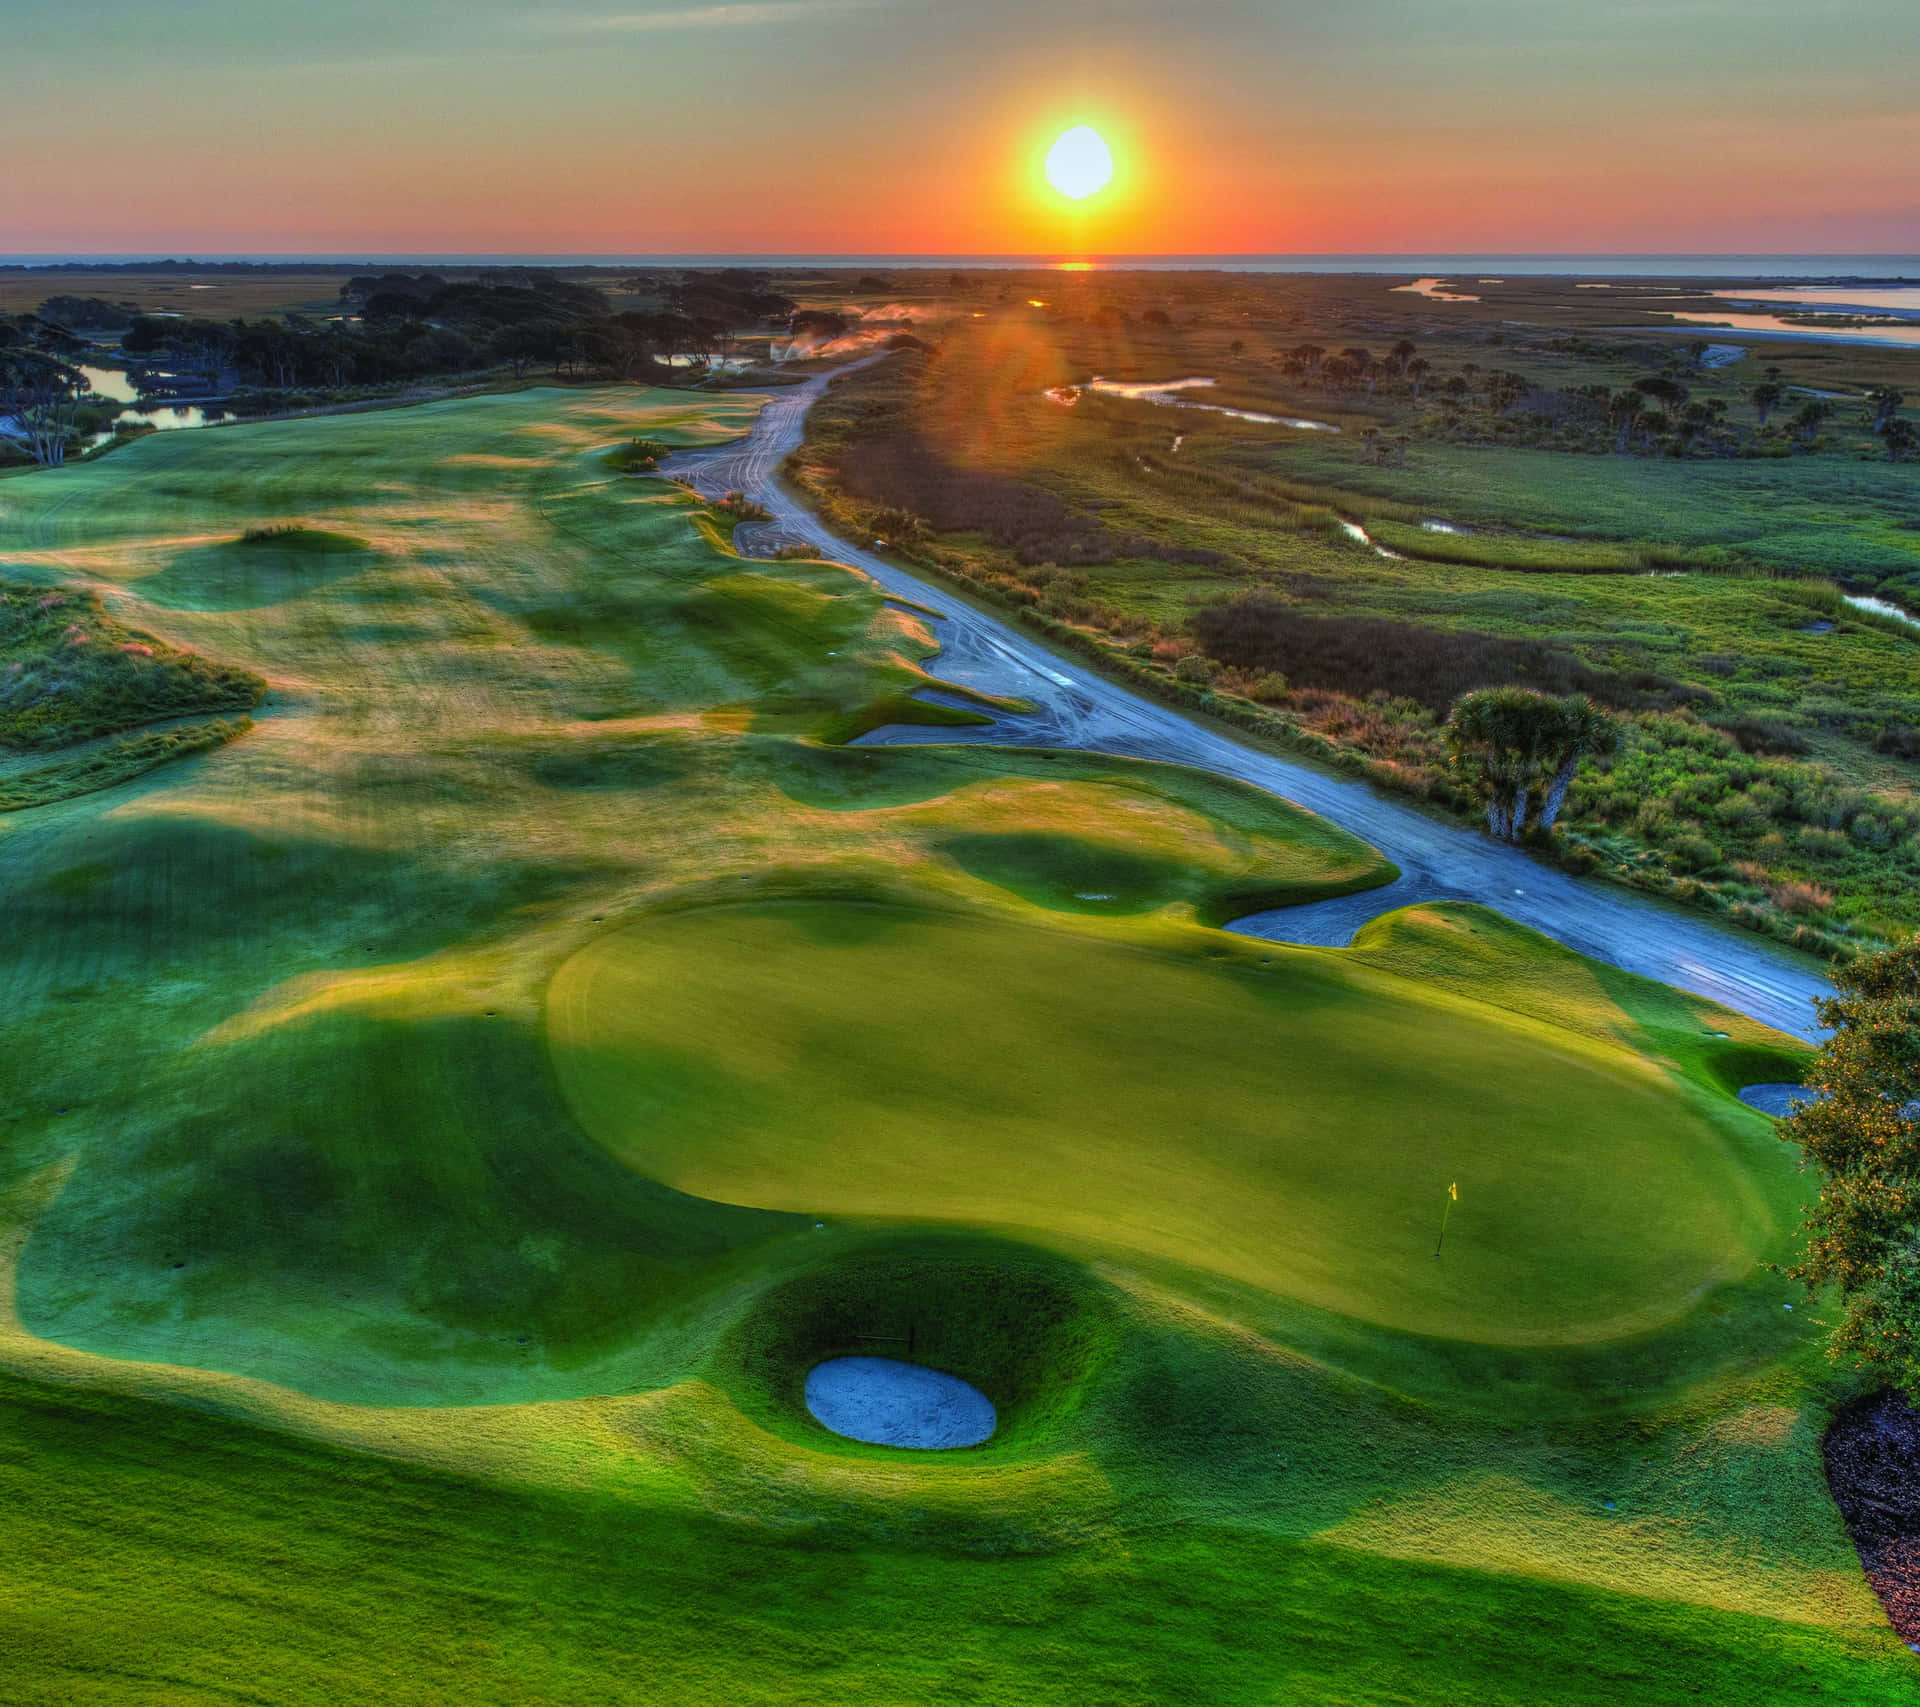 Enjoy the beauty of golf course - take in the scenery and appreciate the natural wonders.